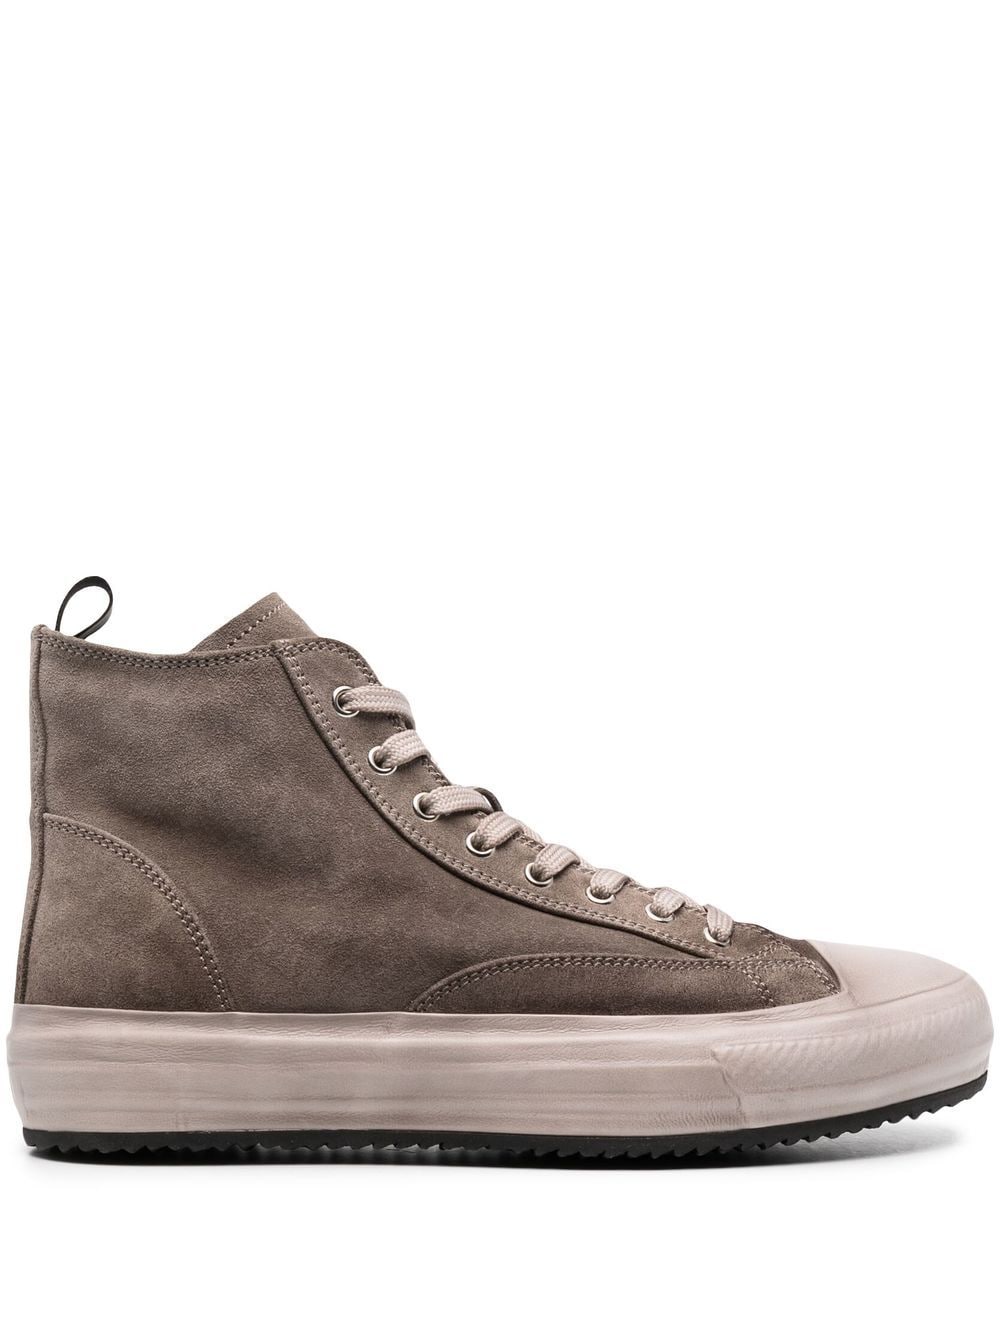 Image 1 of Officine Creative Mes 011 high-top sneakers